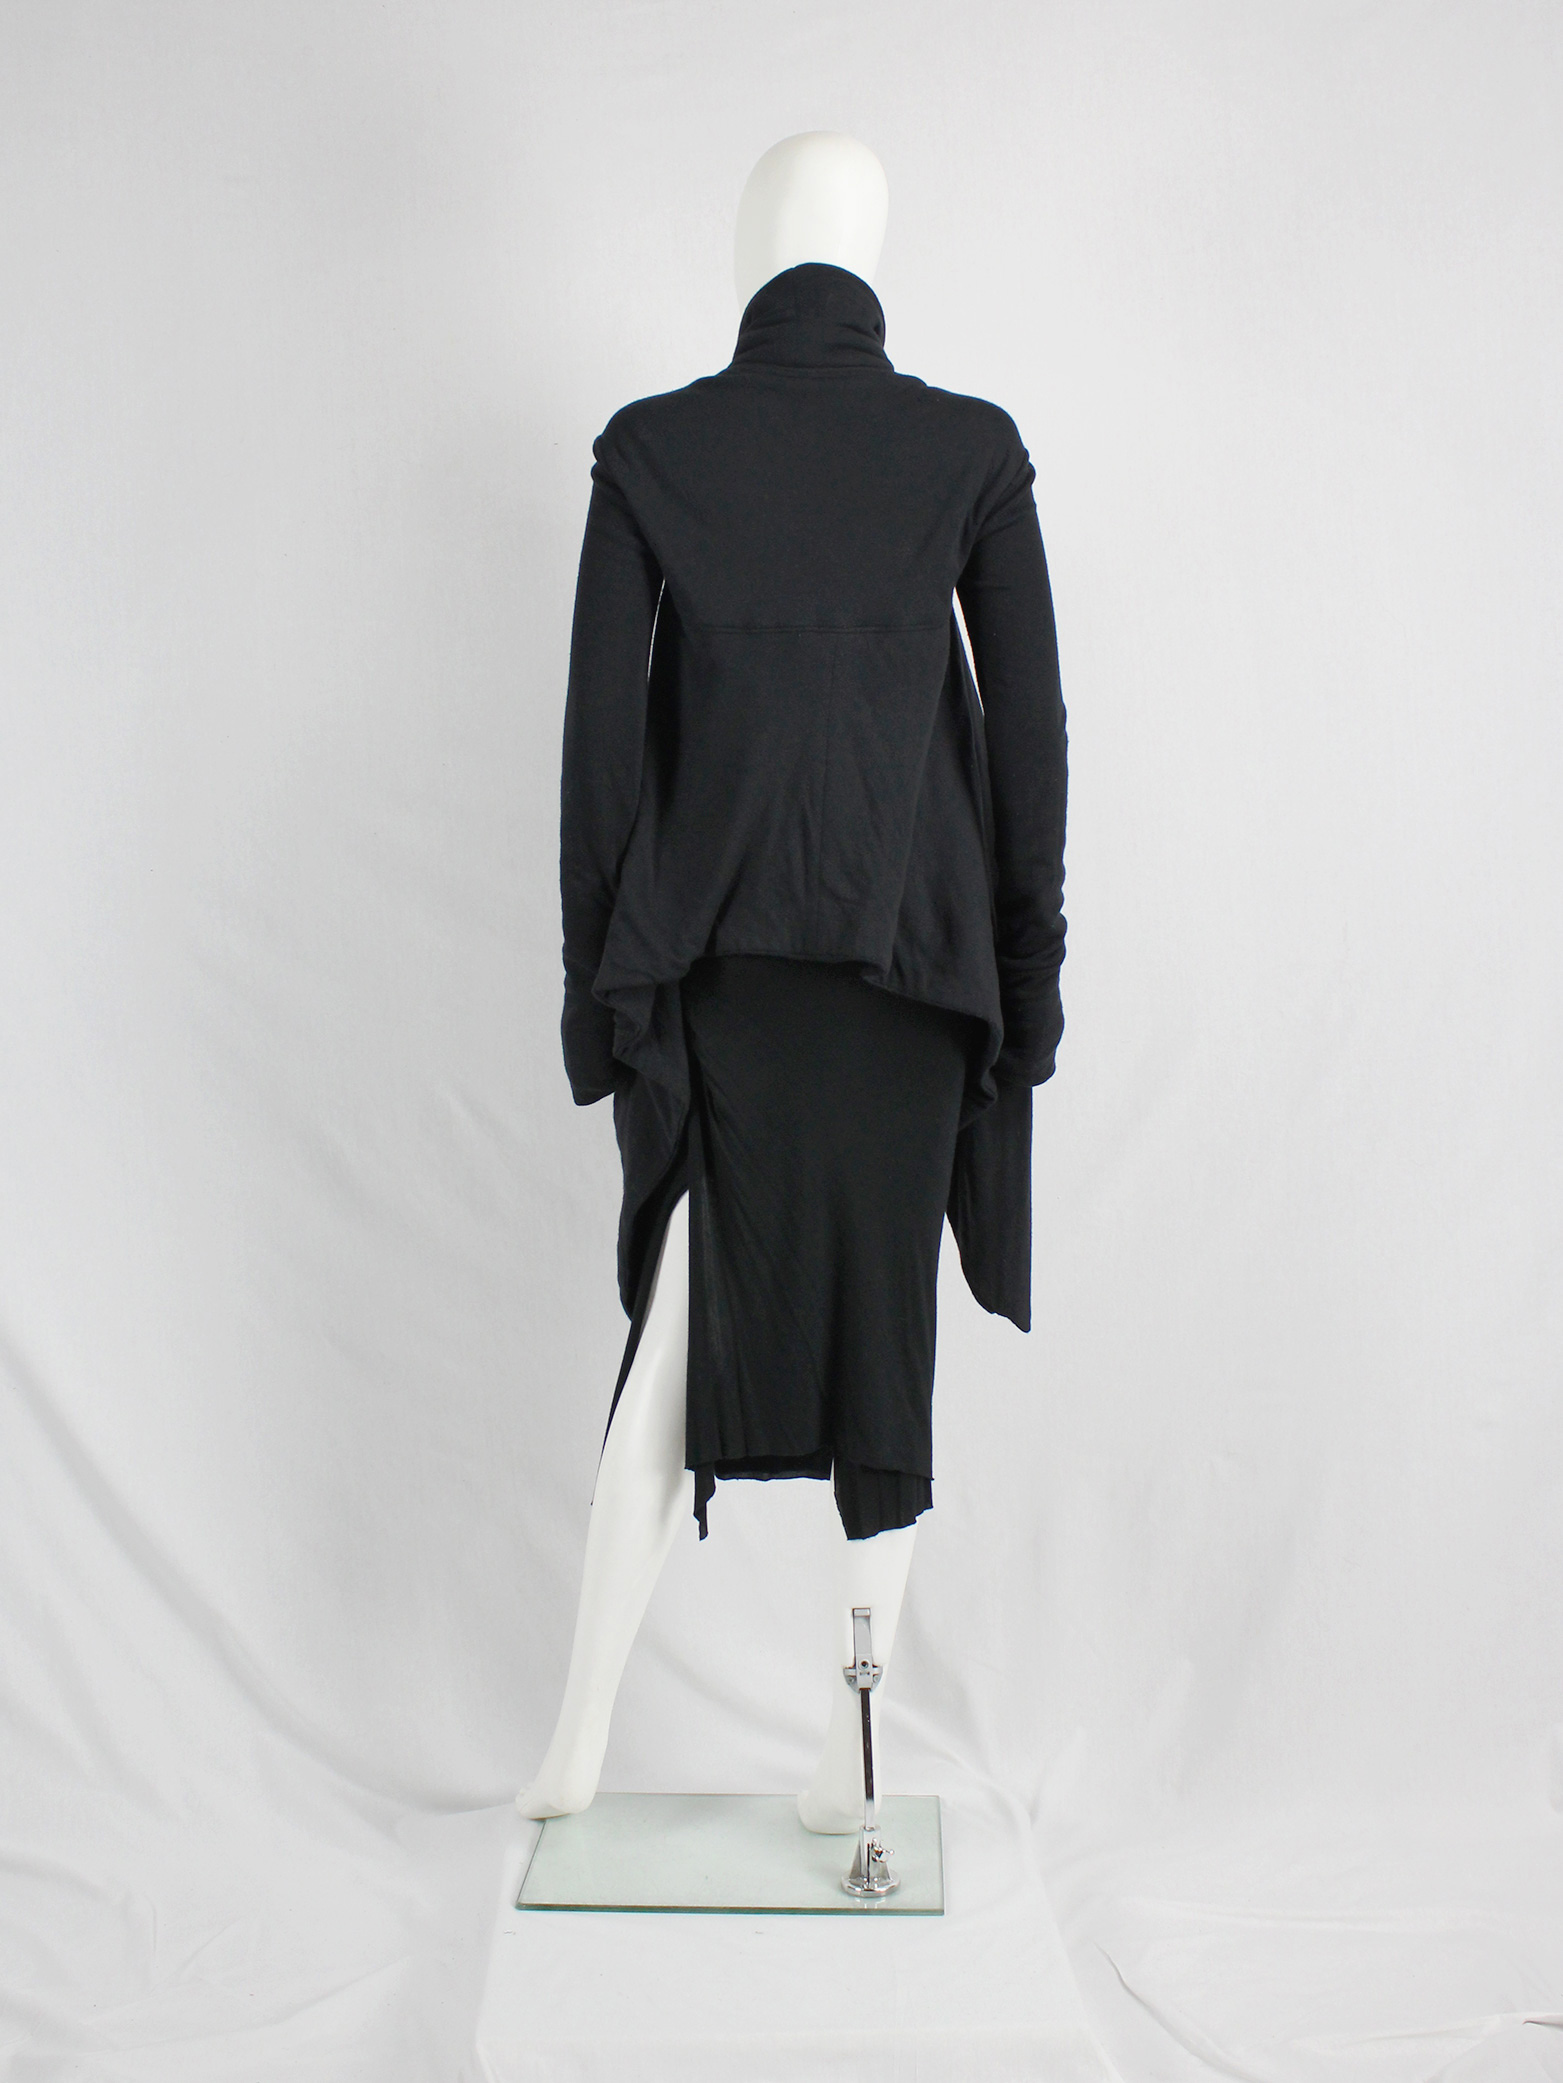 Rick Owens lilies black draped coat with tie front and triangular ...